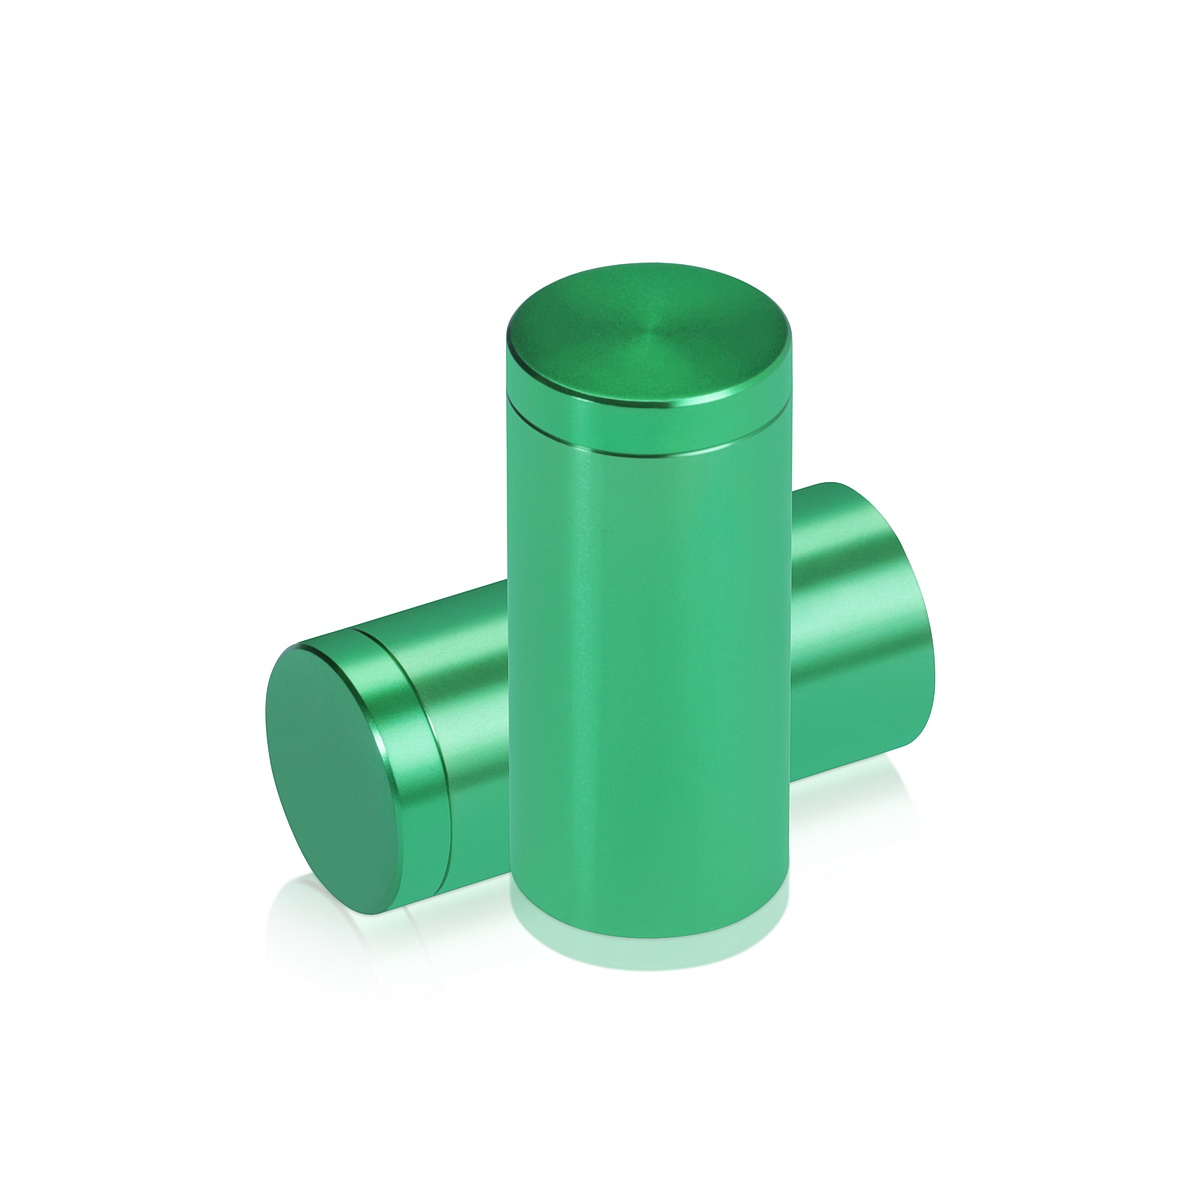 3/4'' Diameter X 1-1/2'' Barrel Length, Affordable Aluminum Standoffs, Green Anodized Finish Easy Fasten Standoff (For Inside / Outside use) [Required Material Hole Size: 7/16'']